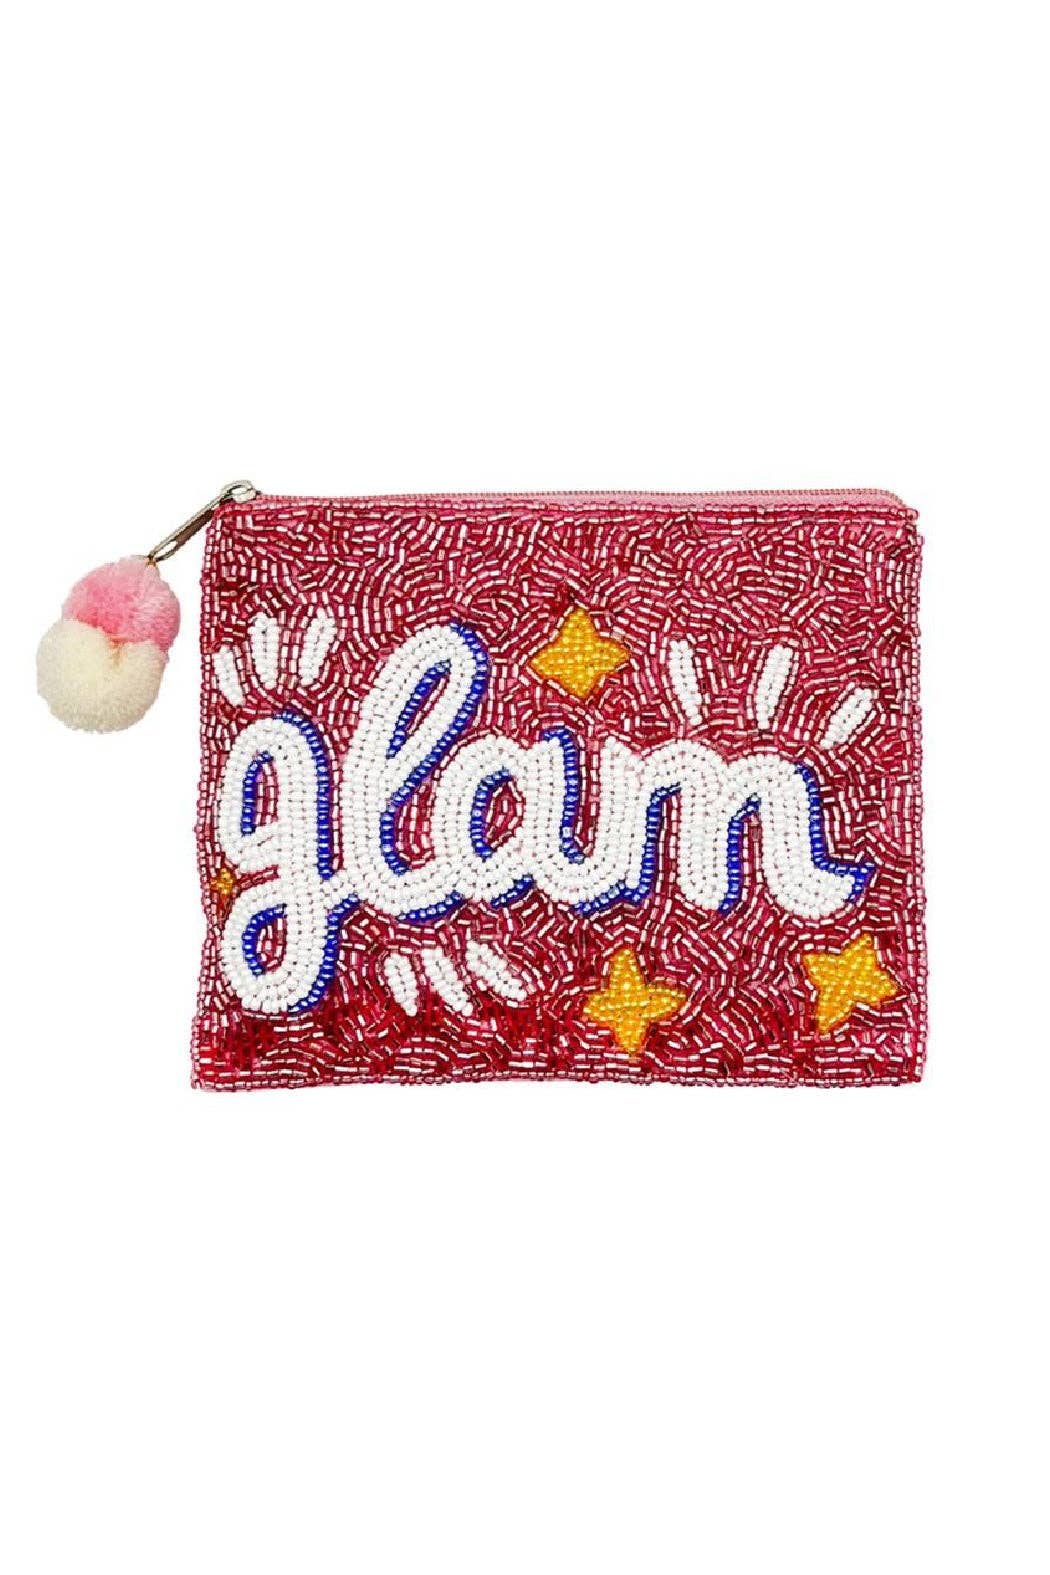 Embellish Your Life - Glam Beaded Pouch Bag